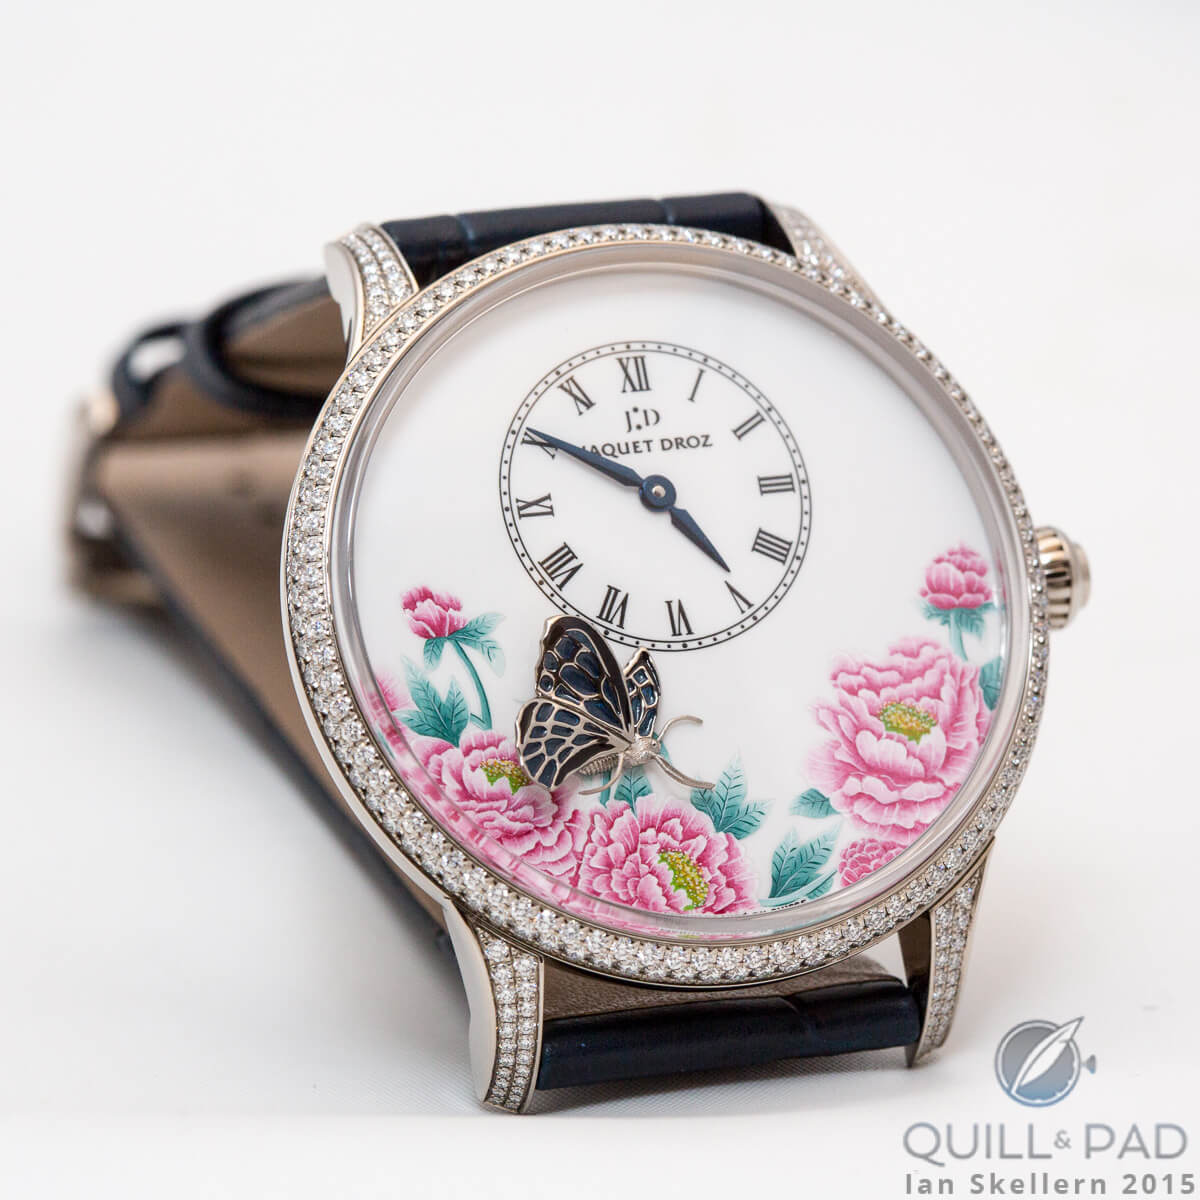 The Jaquet Droz Butterfly Journey in white gold